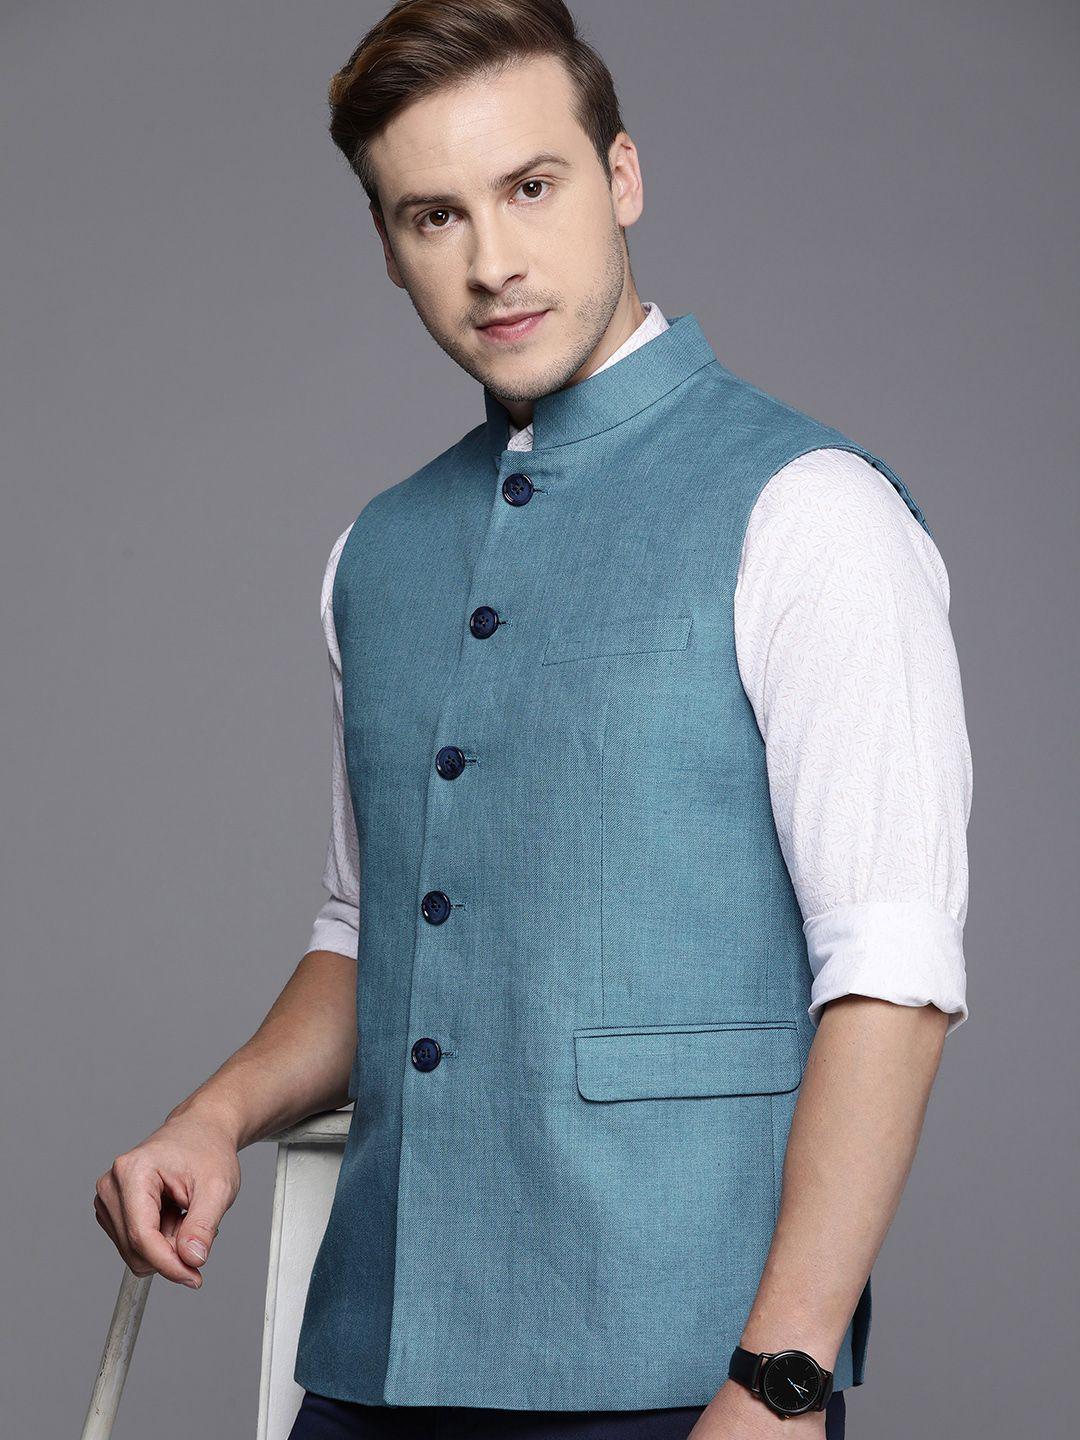 louis philippe solid pure linen nehru jackets